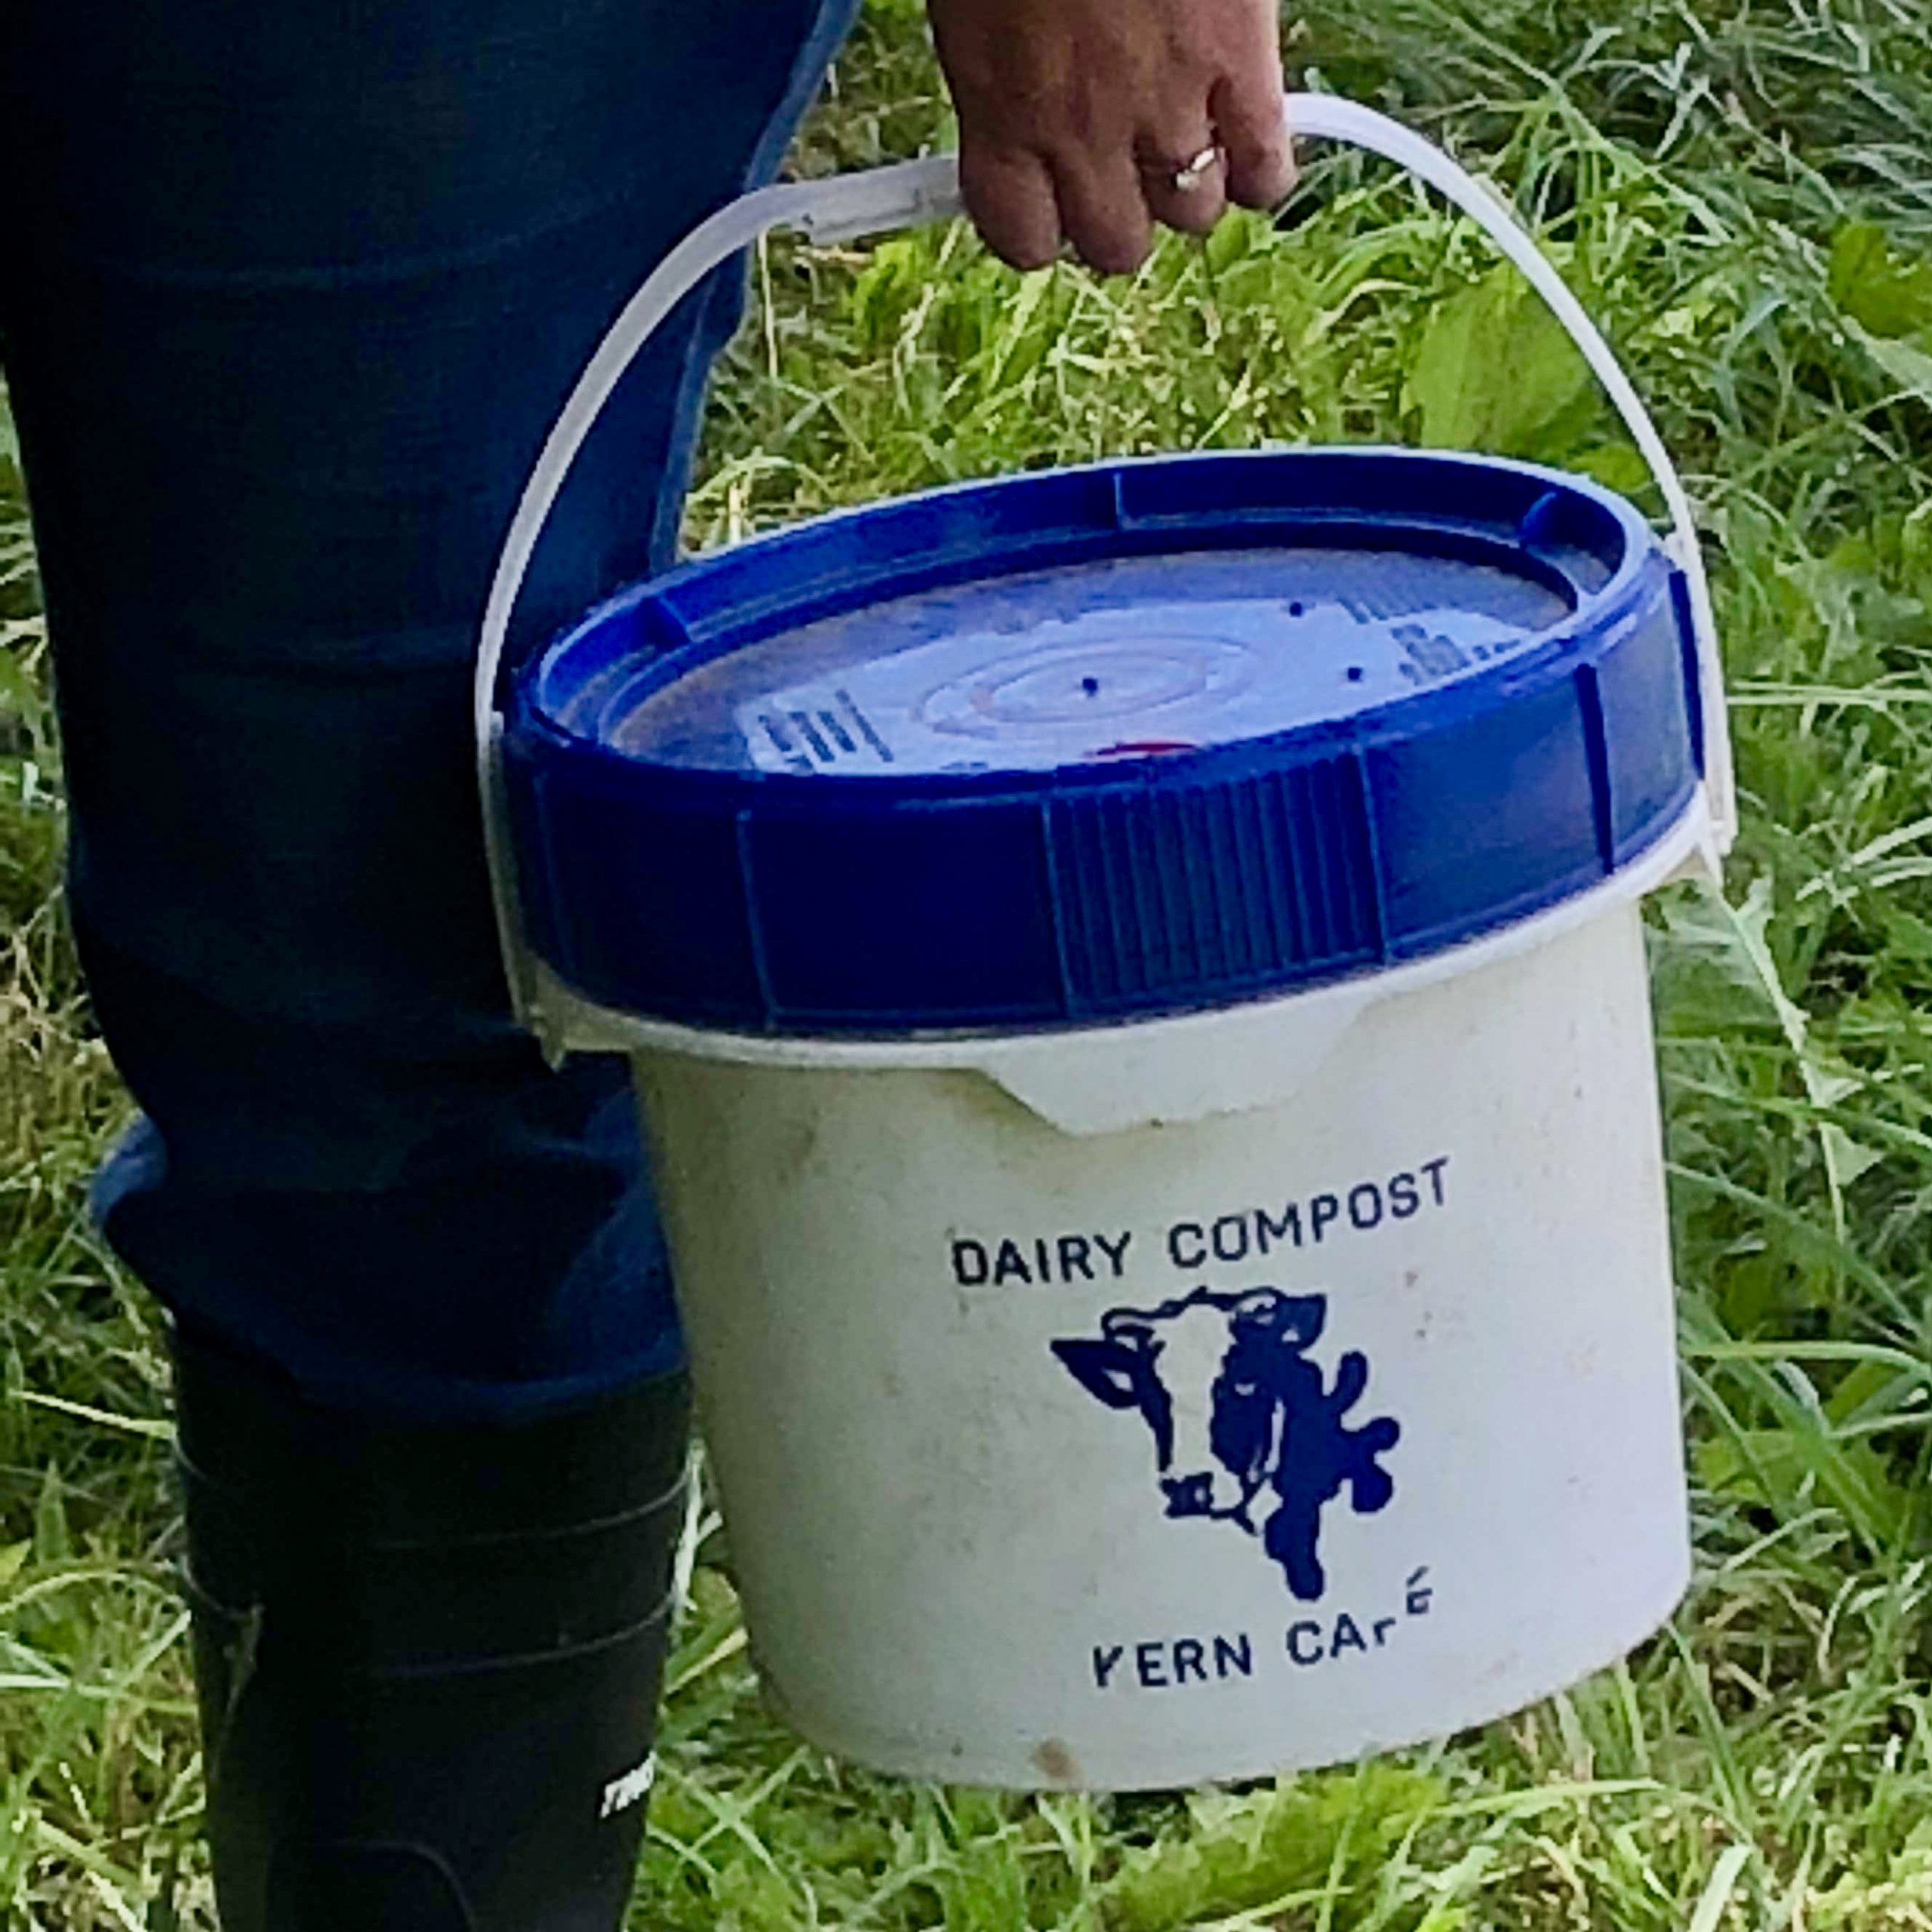 A person carrying a "Dairy Compost Kern Cafe" blue lid and white base bucket.